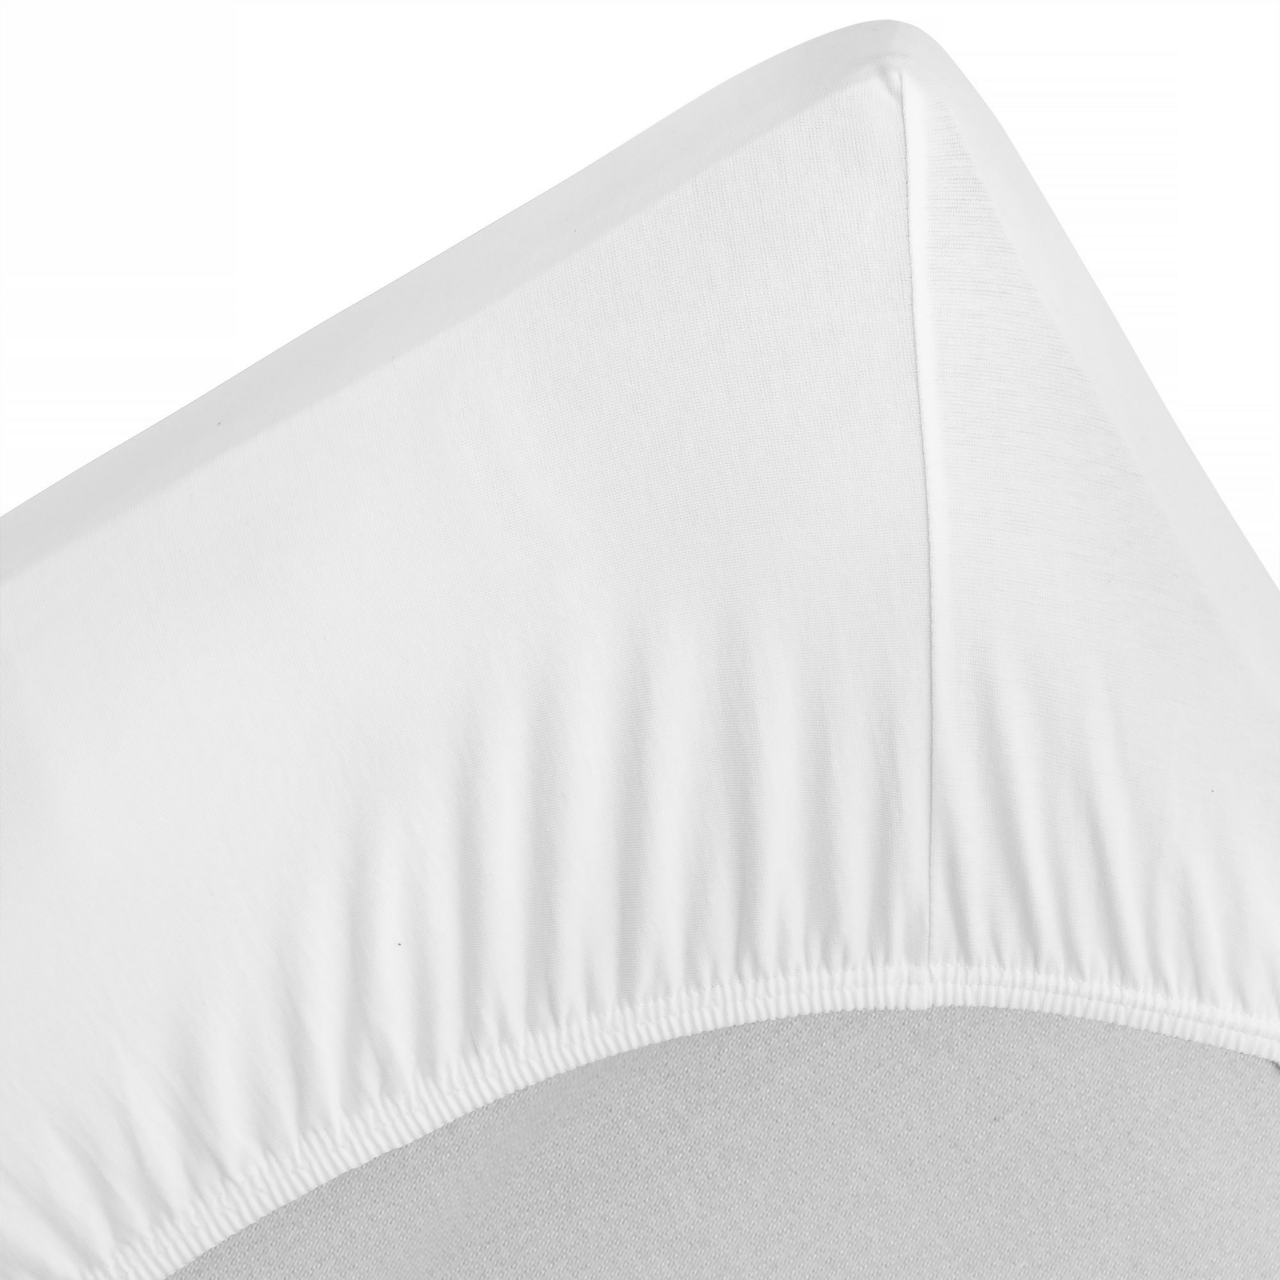 Mattress cover, fitted sheet 120x200 cm, White